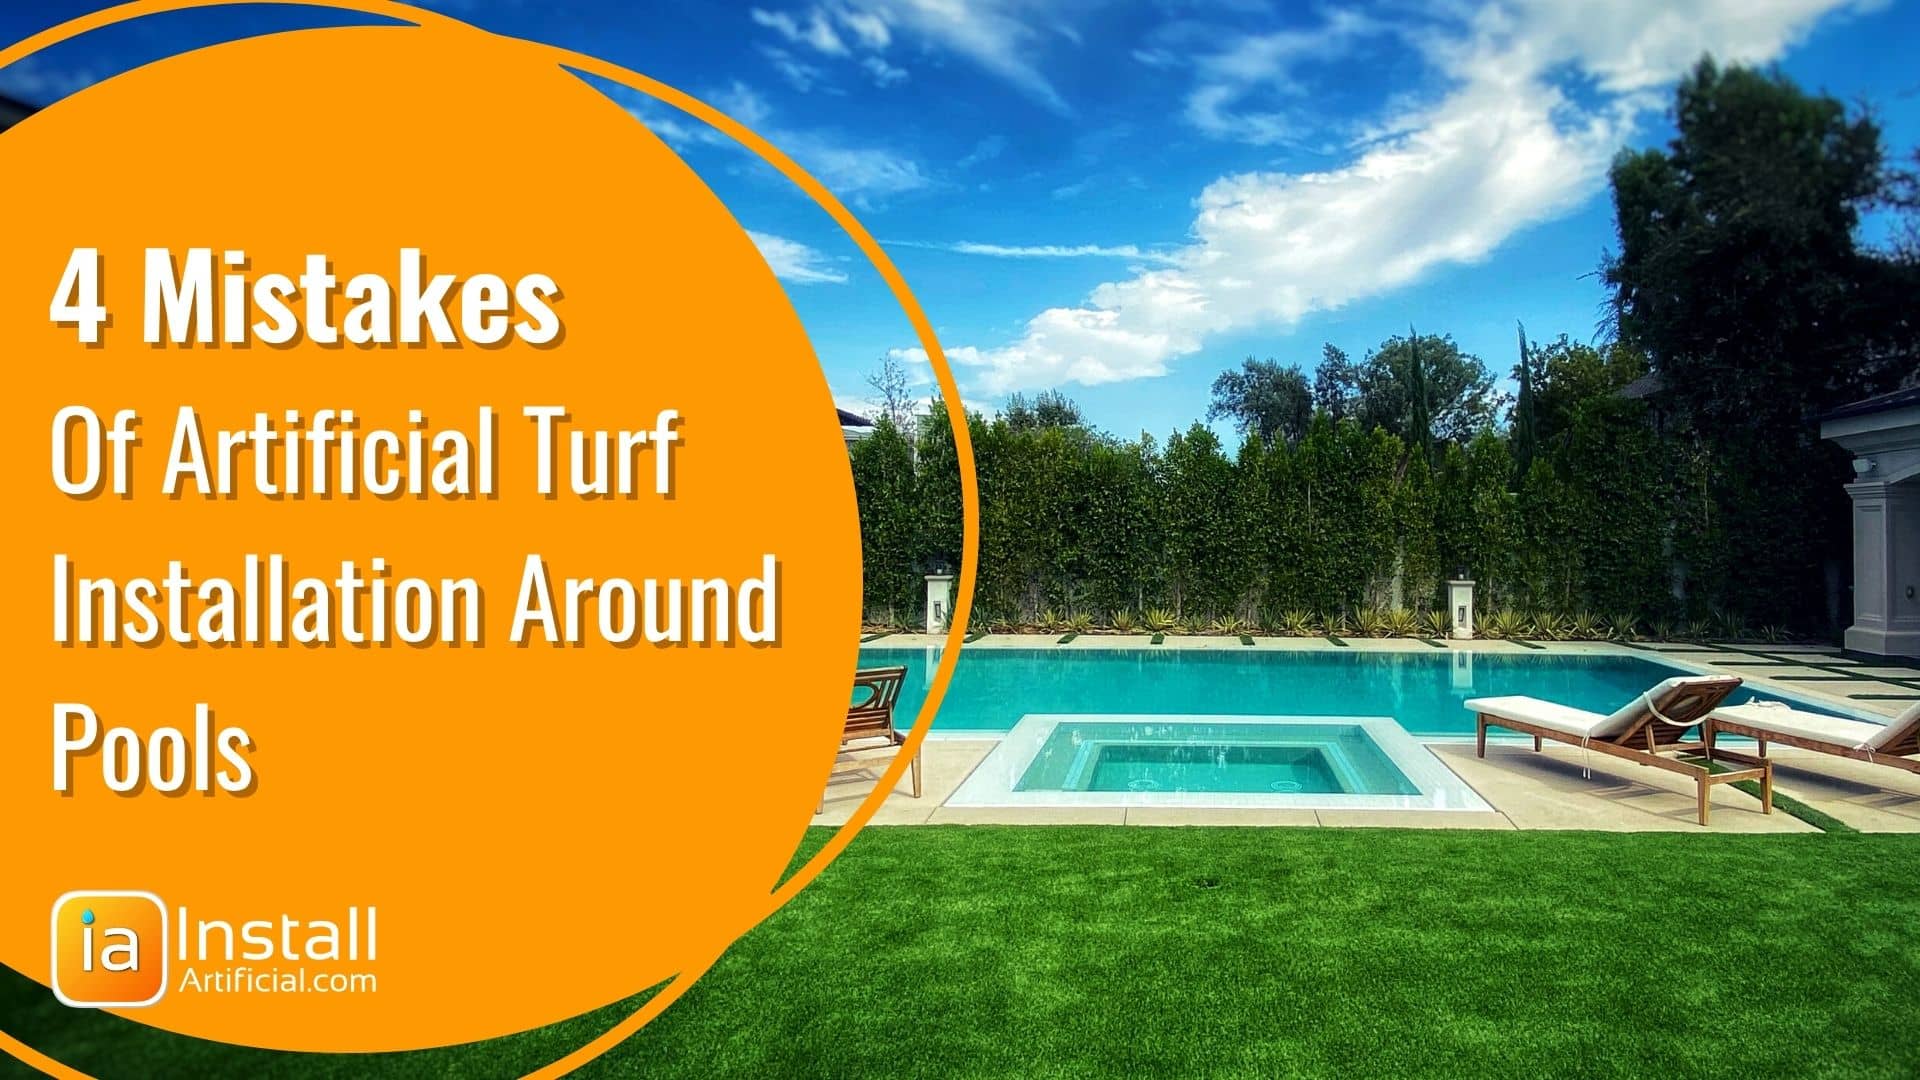 4 mistakes of artificial turf installation around pools